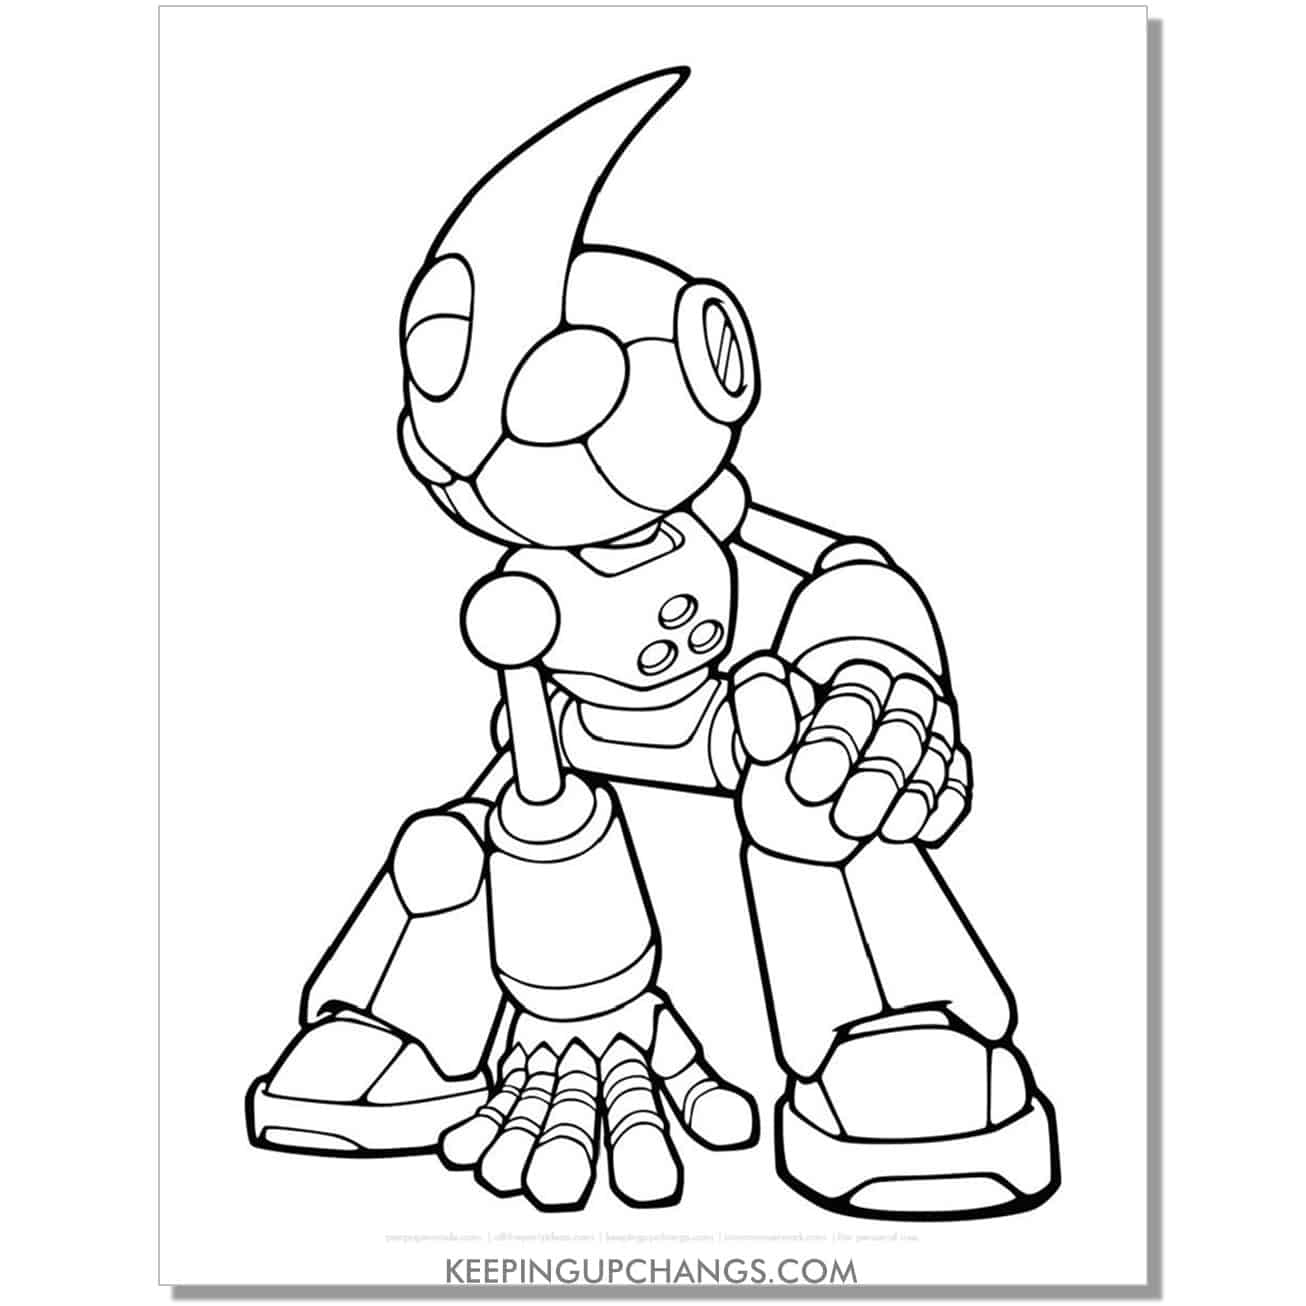 emerl gizoid robot sonic coloring page.